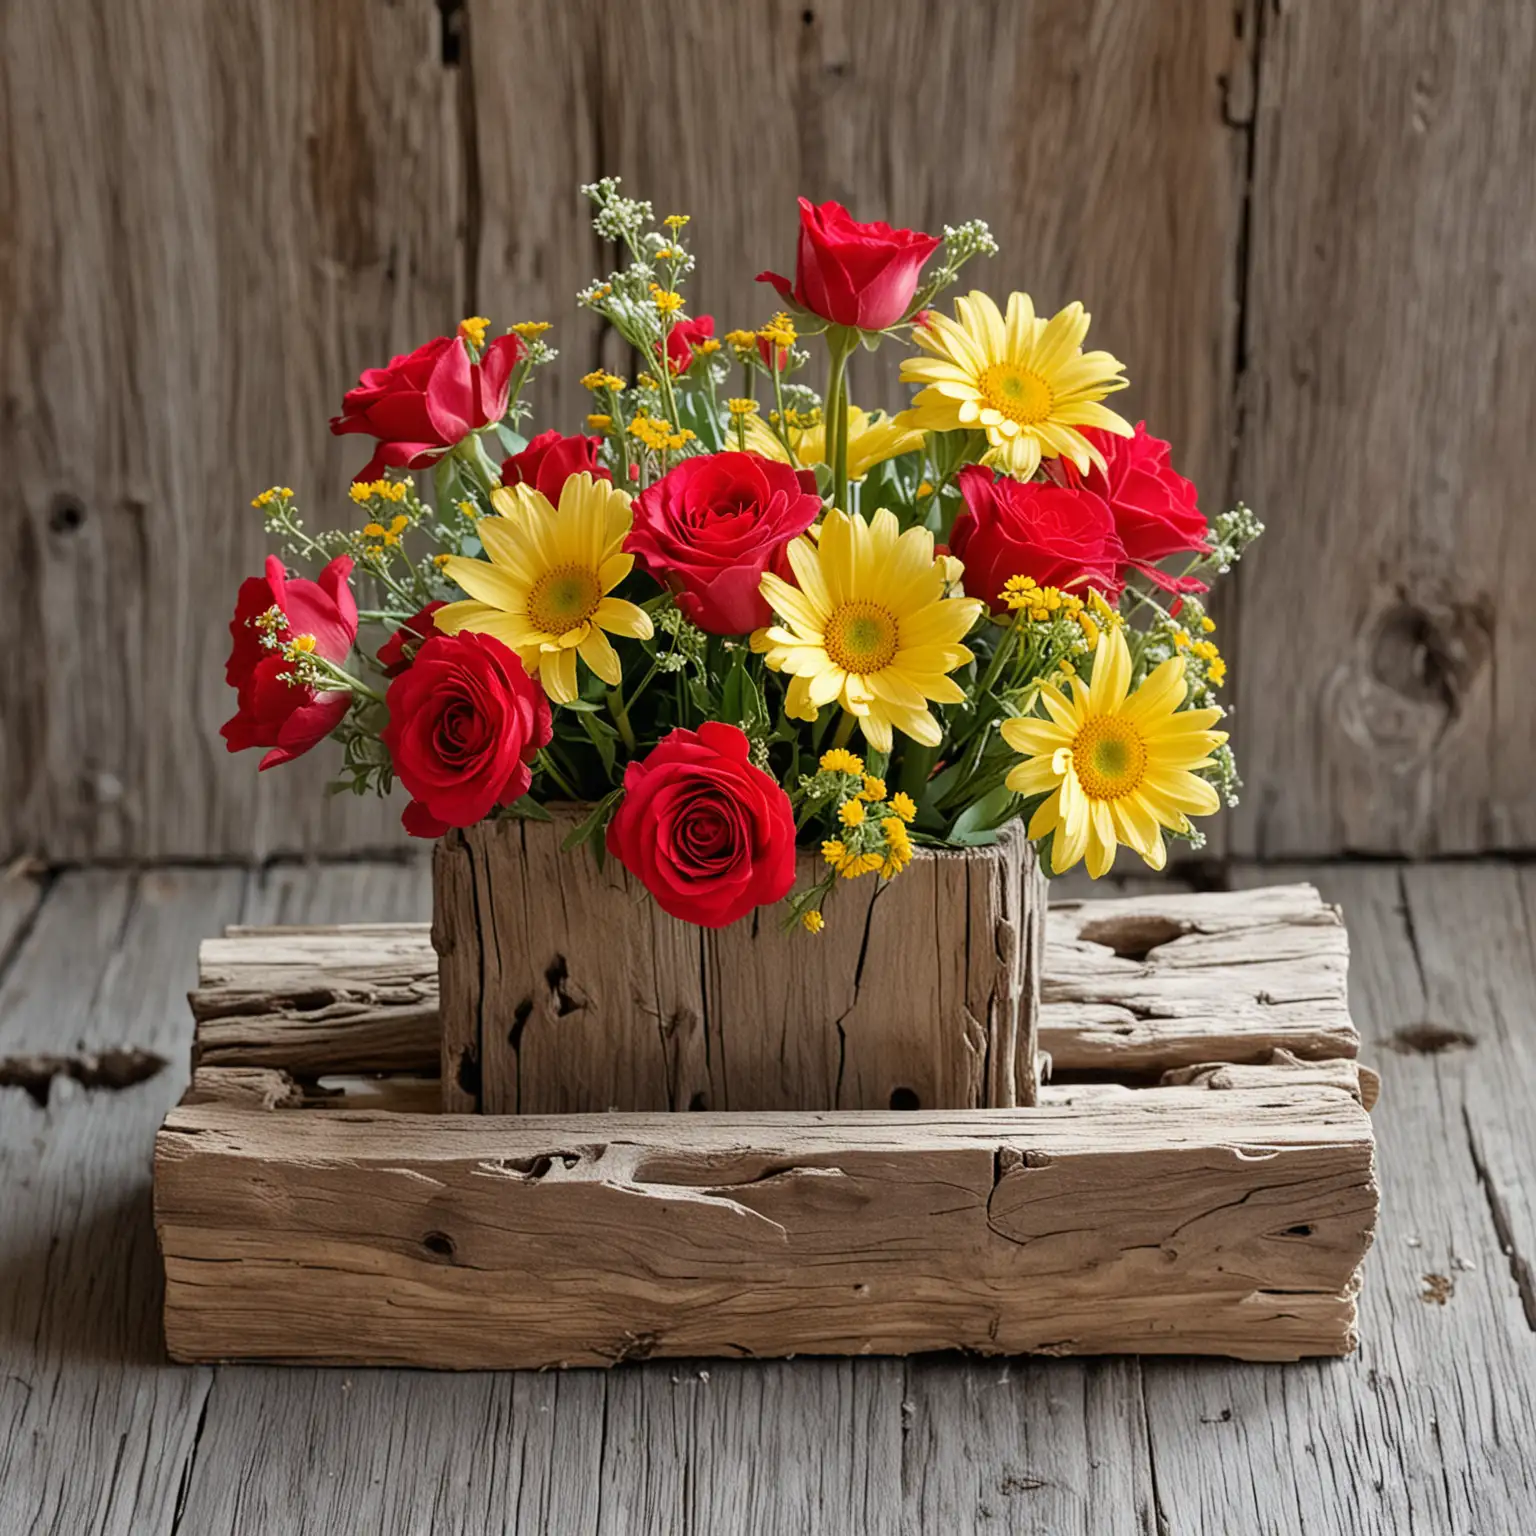 Intimate-Boho-Wedding-Centerpiece-Red-Roses-and-Yellow-Daisies-in-Driftwood-Vase